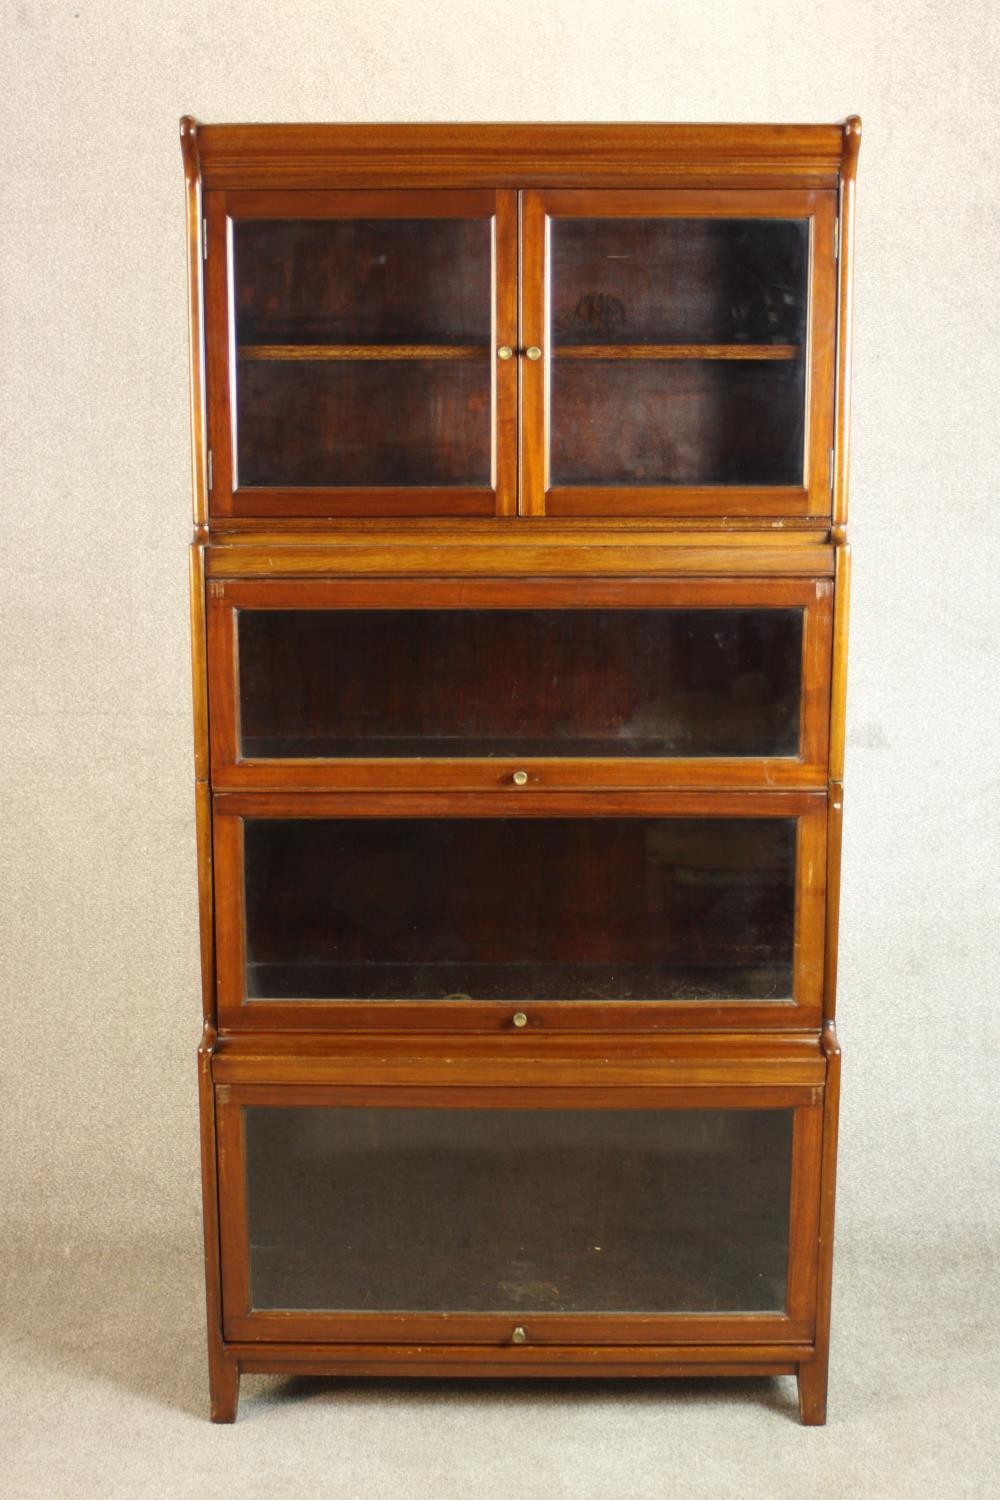 A mid 20th century mahogany Gumm stacking bookcase, with two glazed cupboard doors over three